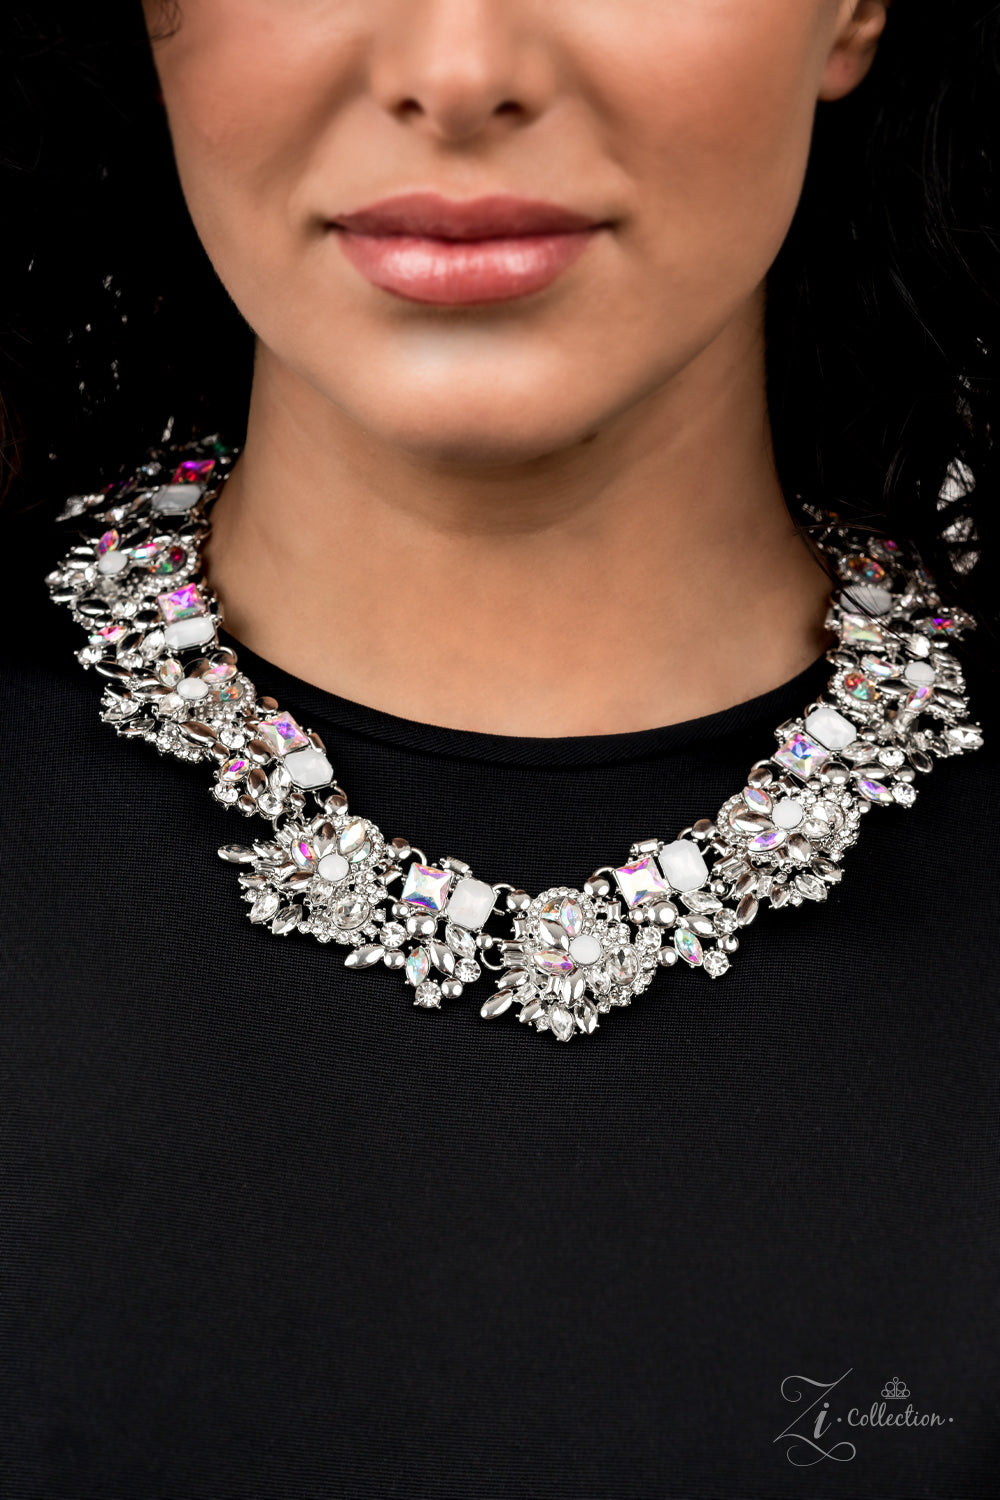 Exceptional Necklace - Iridescent